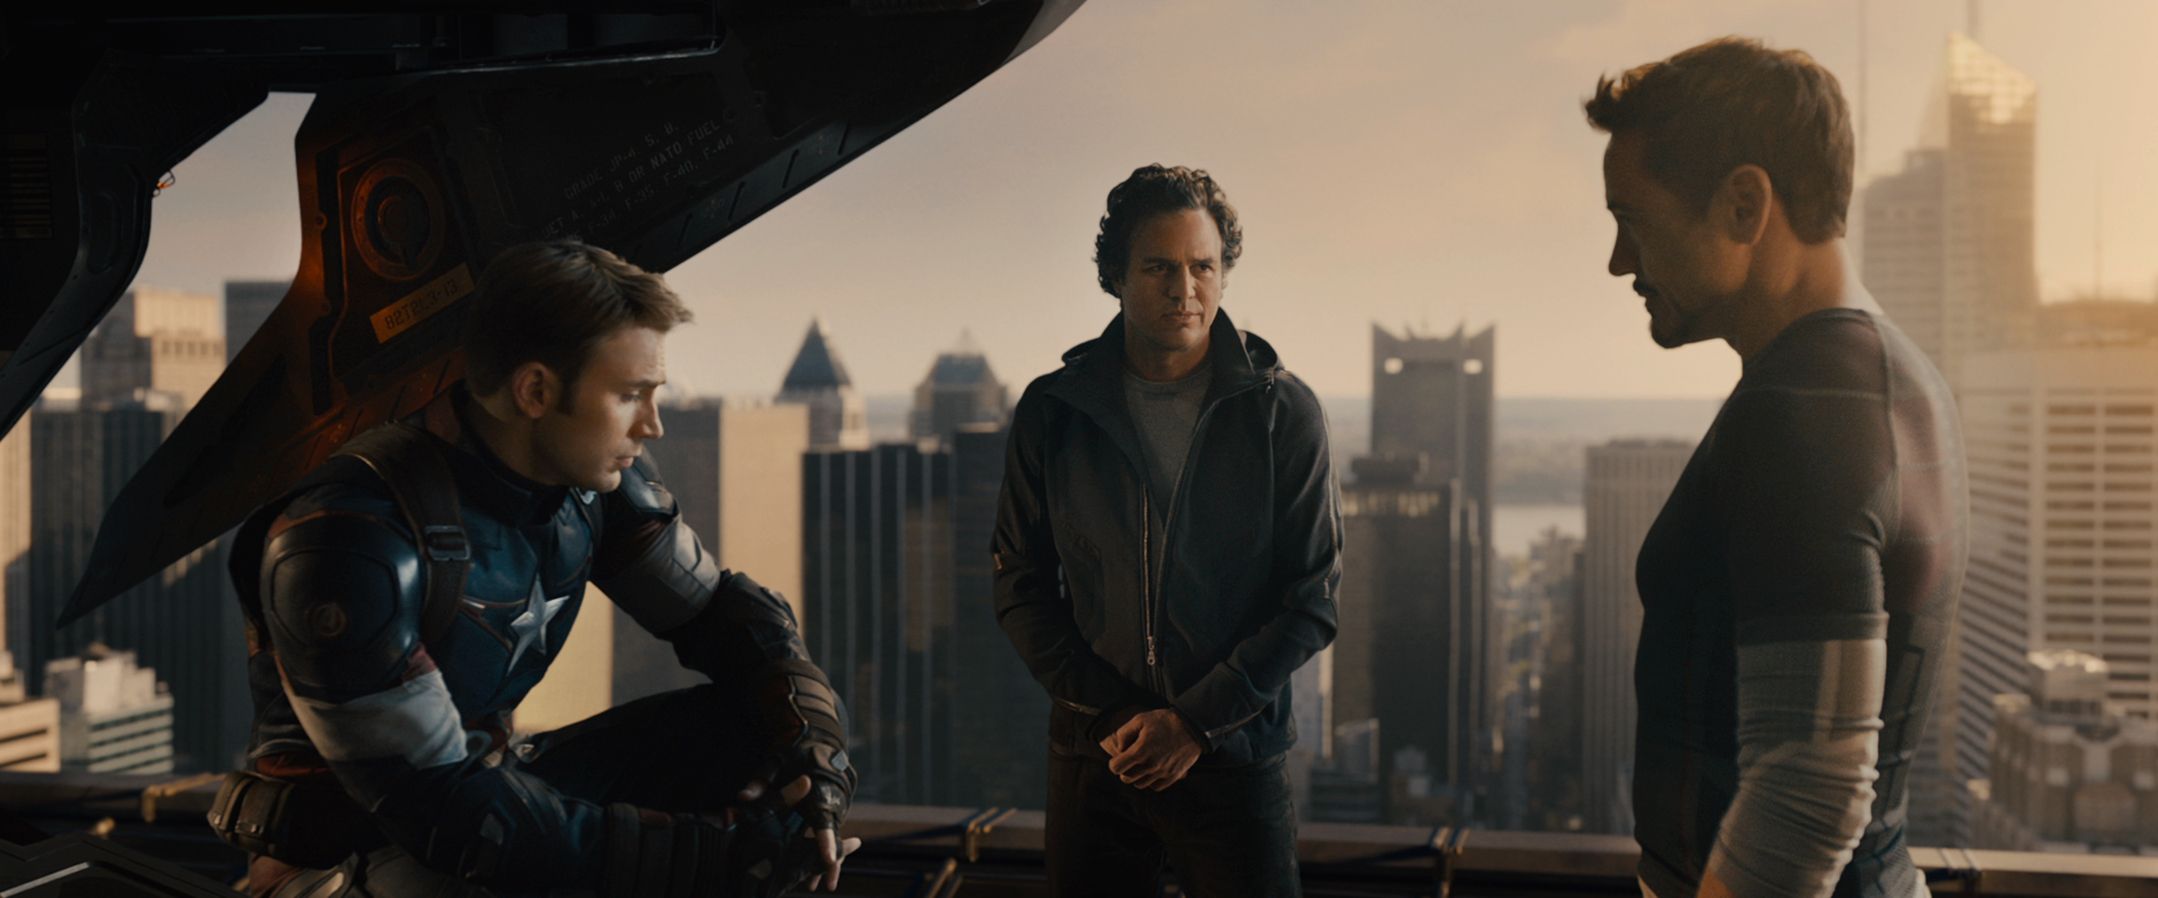 The Avengers Age of Ultron Photo 9